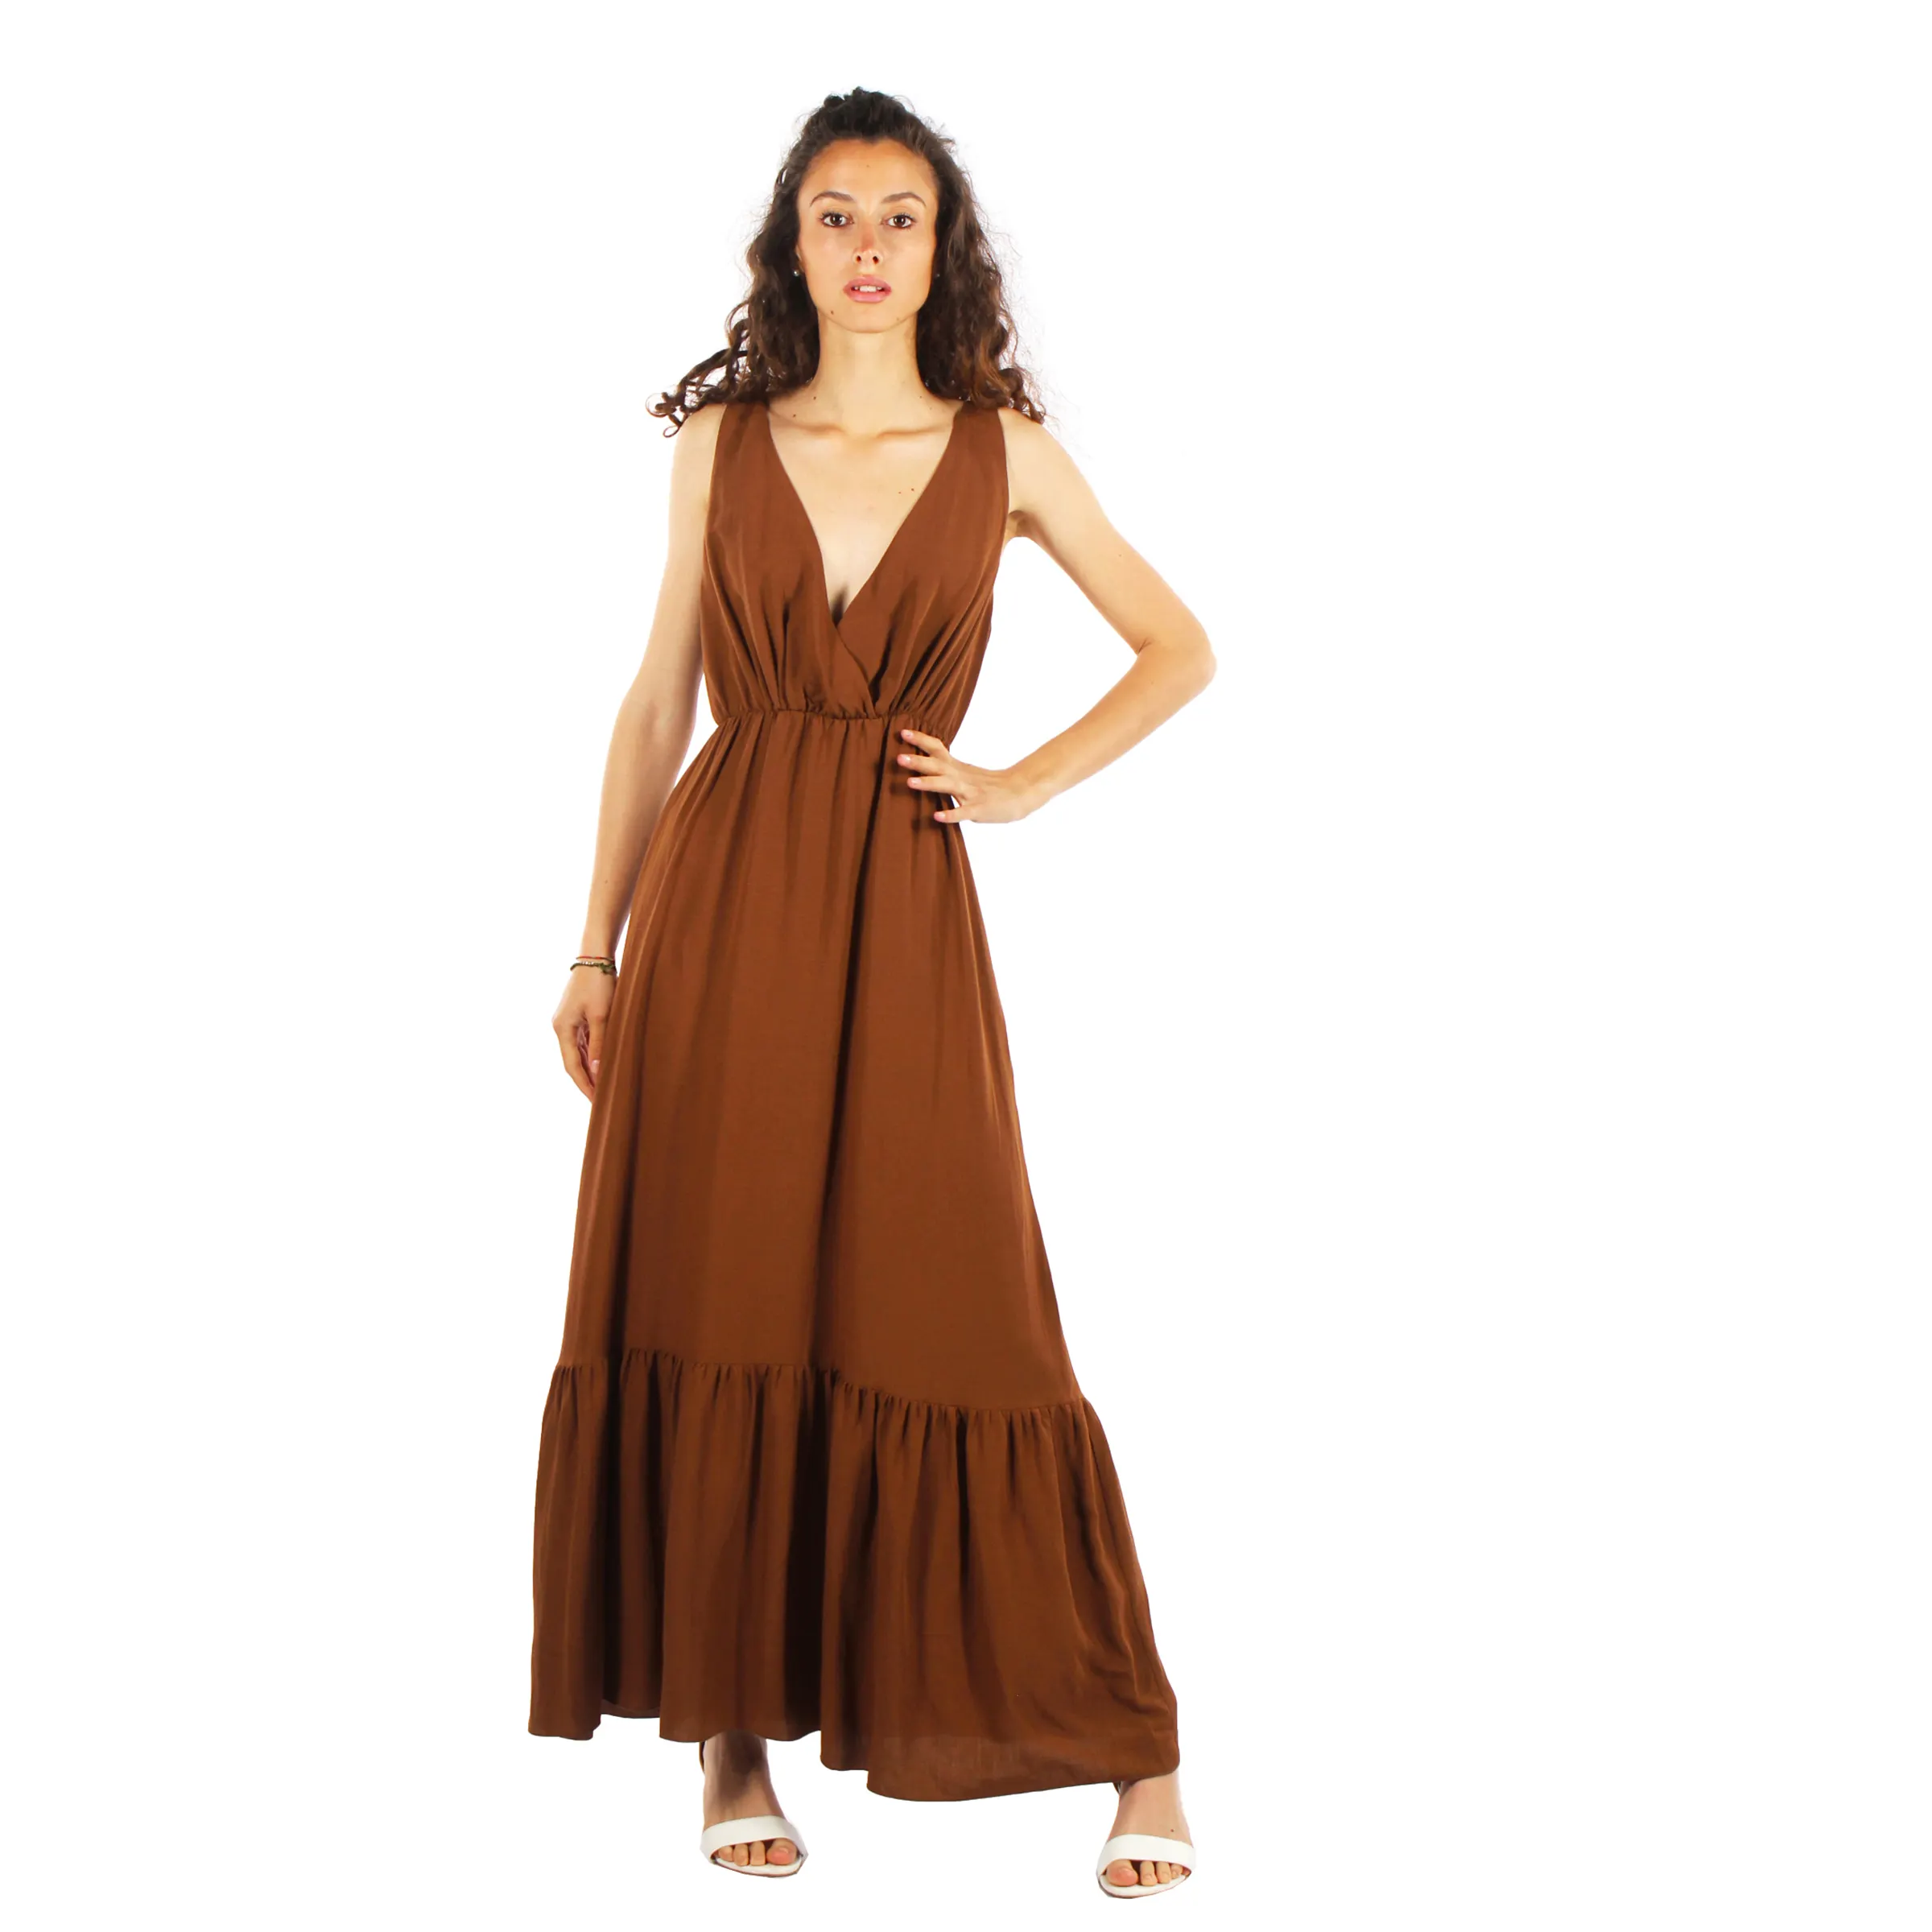 Chic Brown Evening Gown with Elegant Details Effortlessly Stylish for Special relaxed Occasions size large